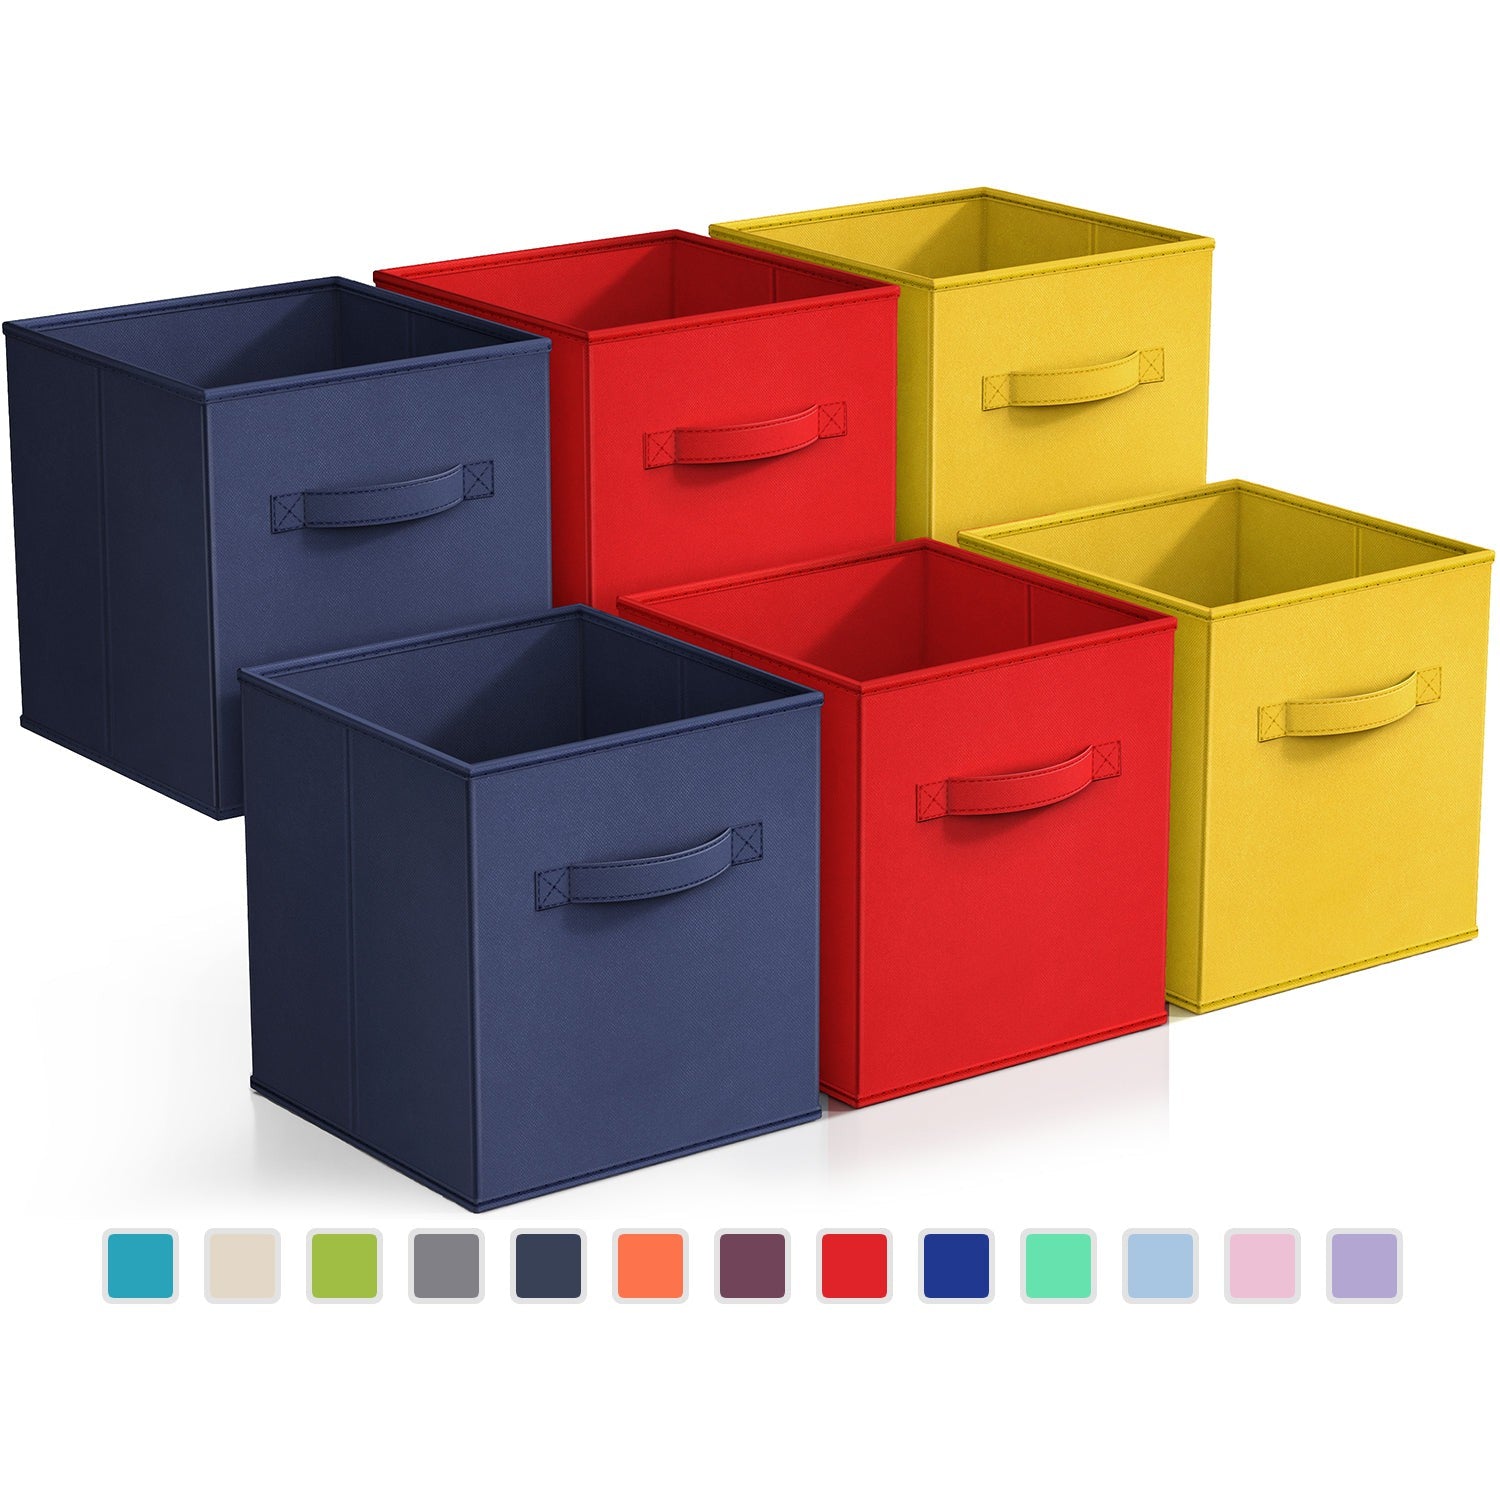 Aoujea Foldable Storage Bins,Linen Fabric Foldable Collapsible Storage Cub-e Bin Organizer Basket with Lid and Handles,Storage Cubes for Toys, Shelves